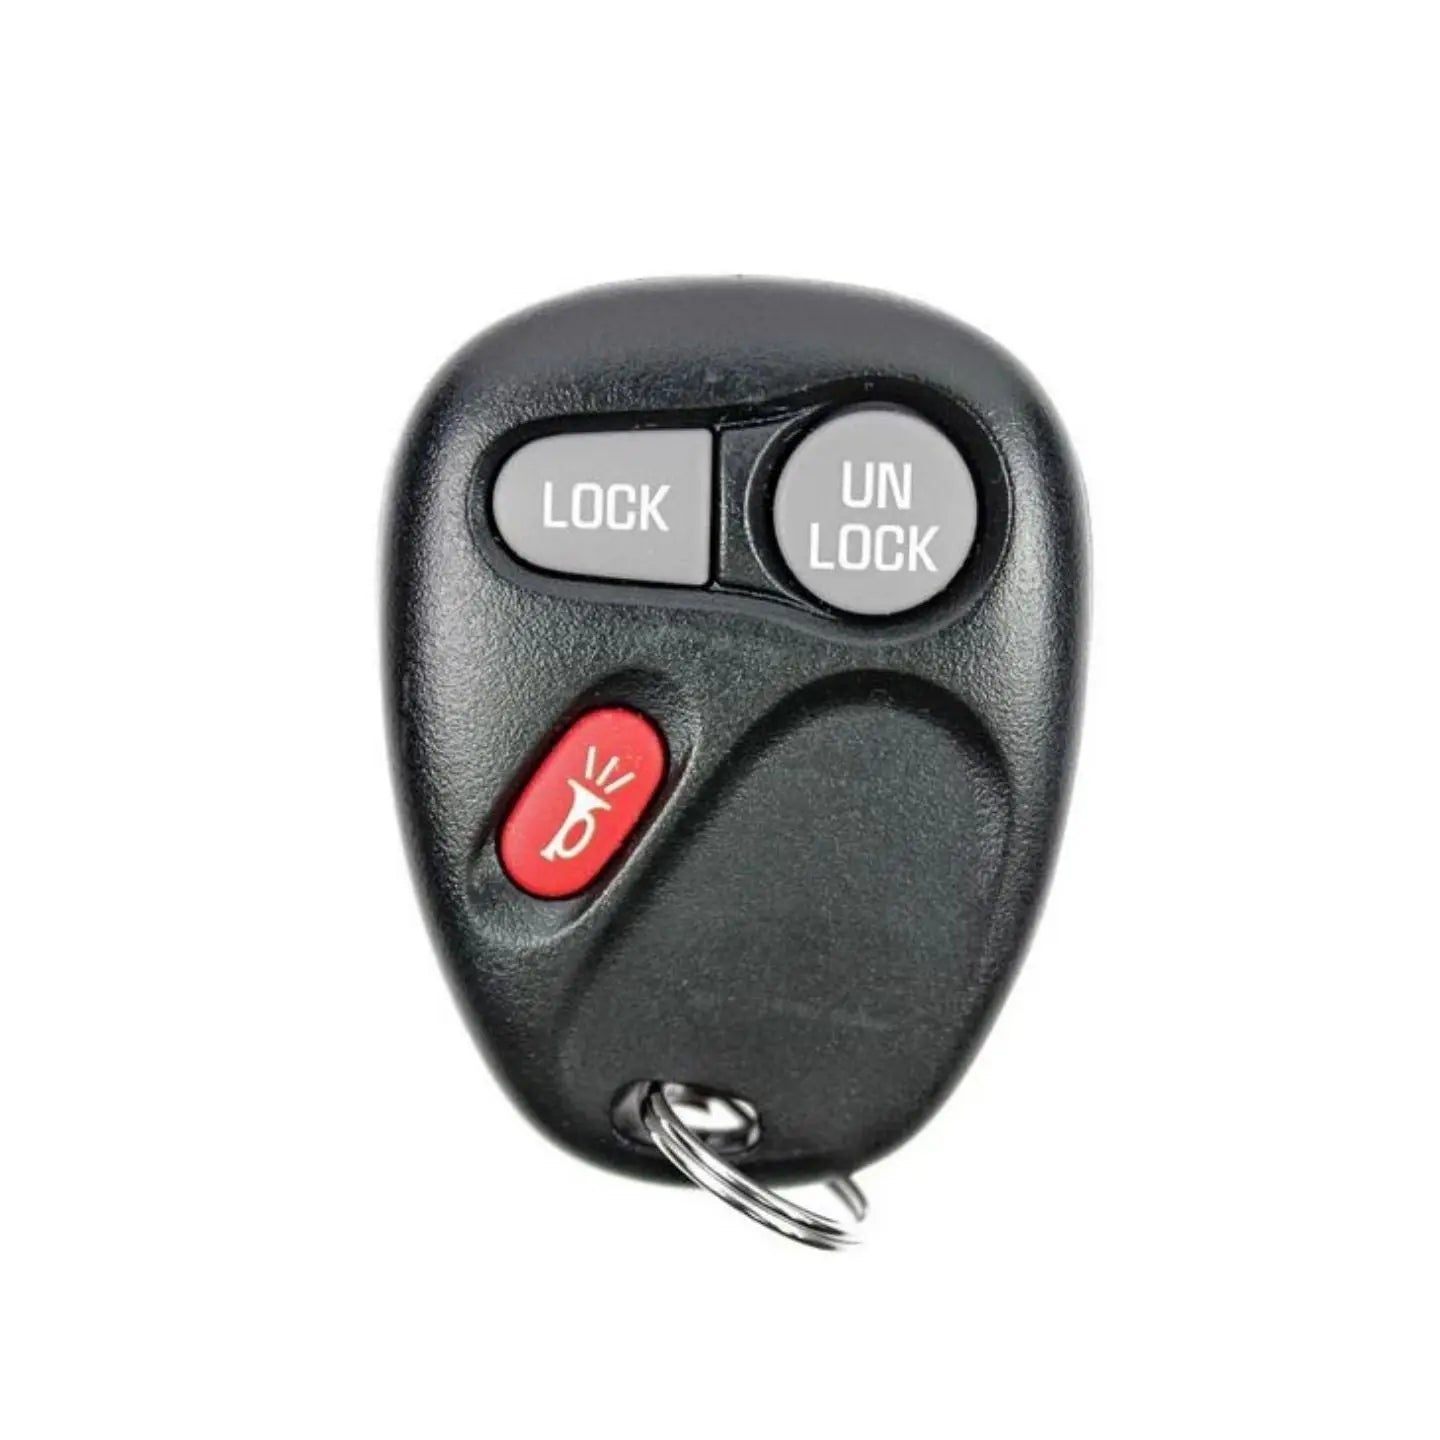 2001-2011 (Aftermarket) Keyless Entry Remote for GMC - Cadillac  PN 15042968  KOBLEAR1XT